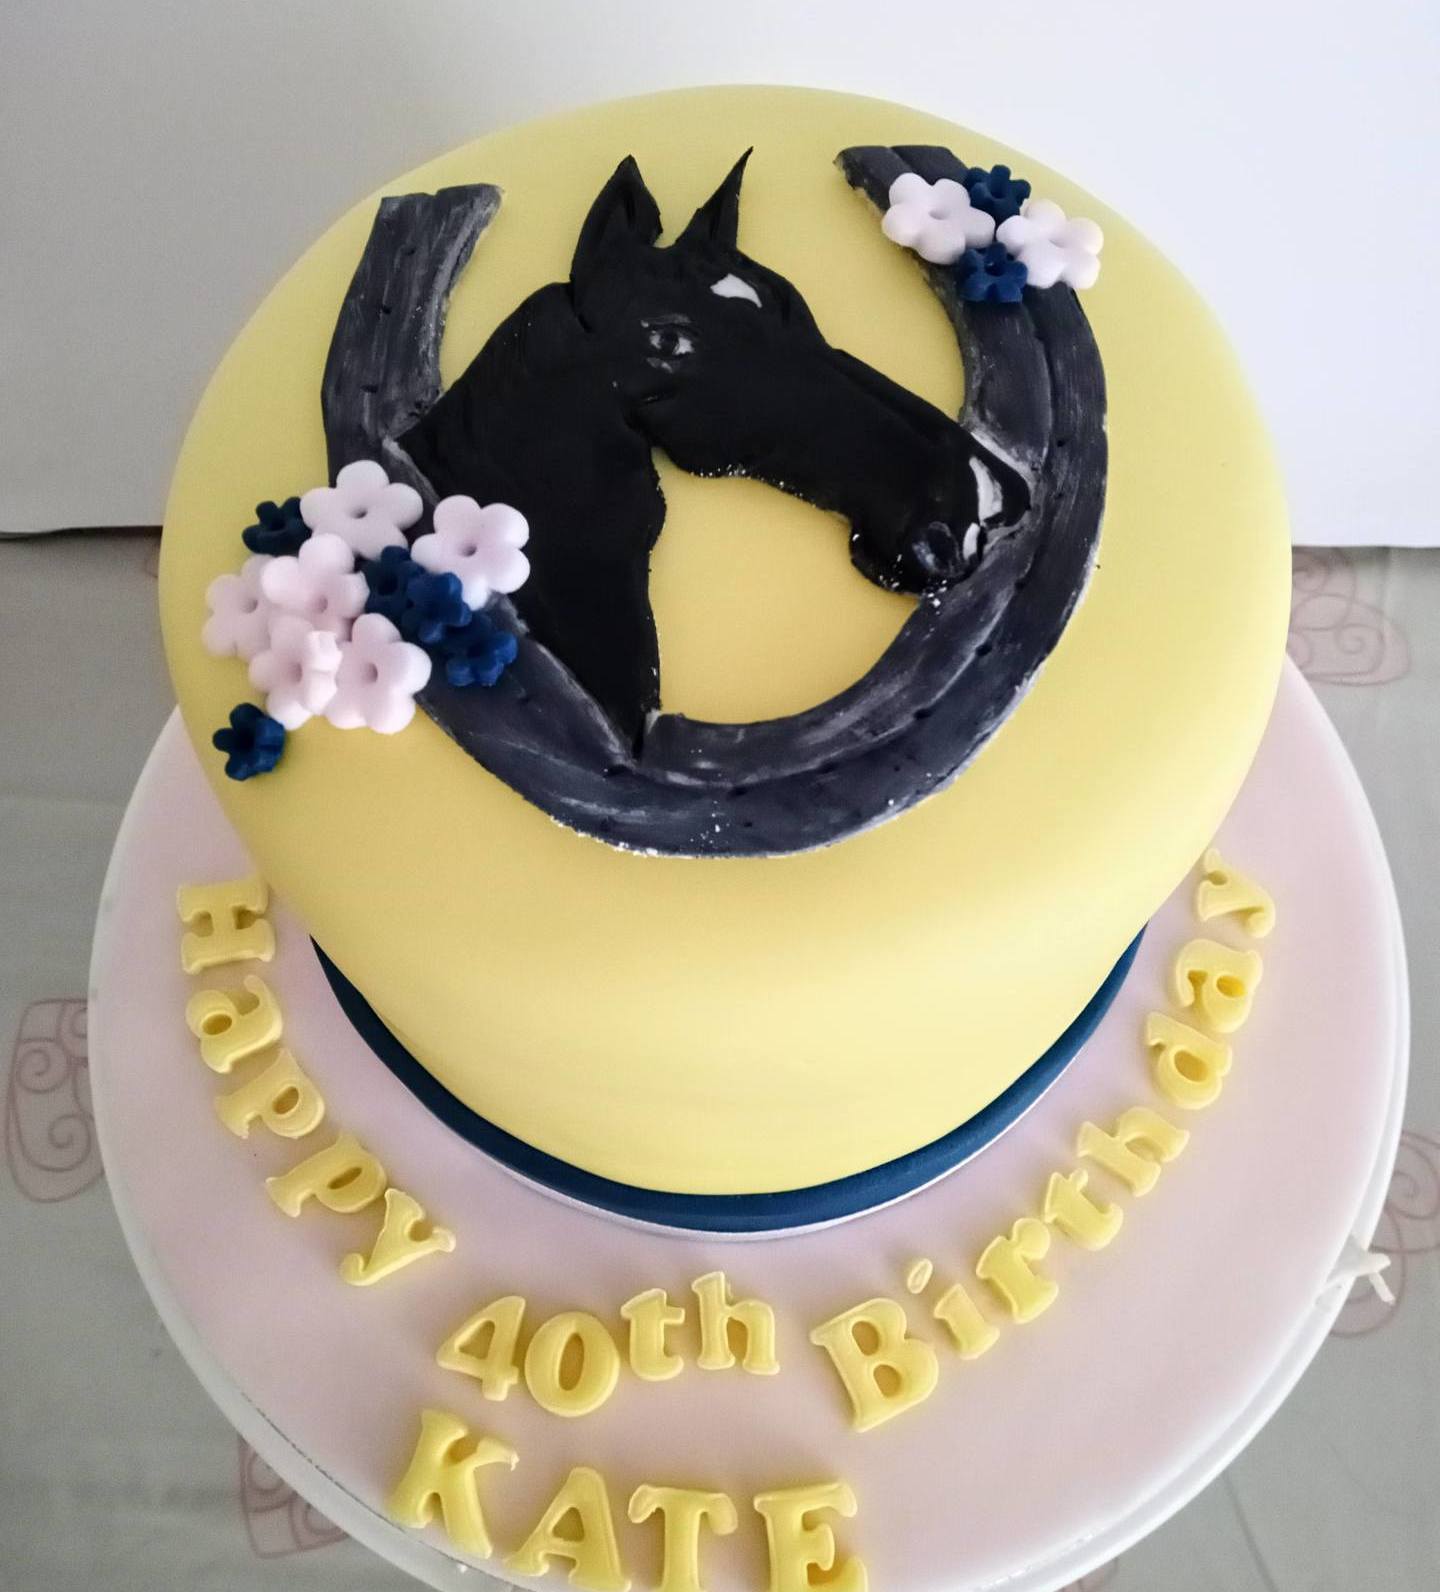 Ladies birthday cake with sugar image of a horse